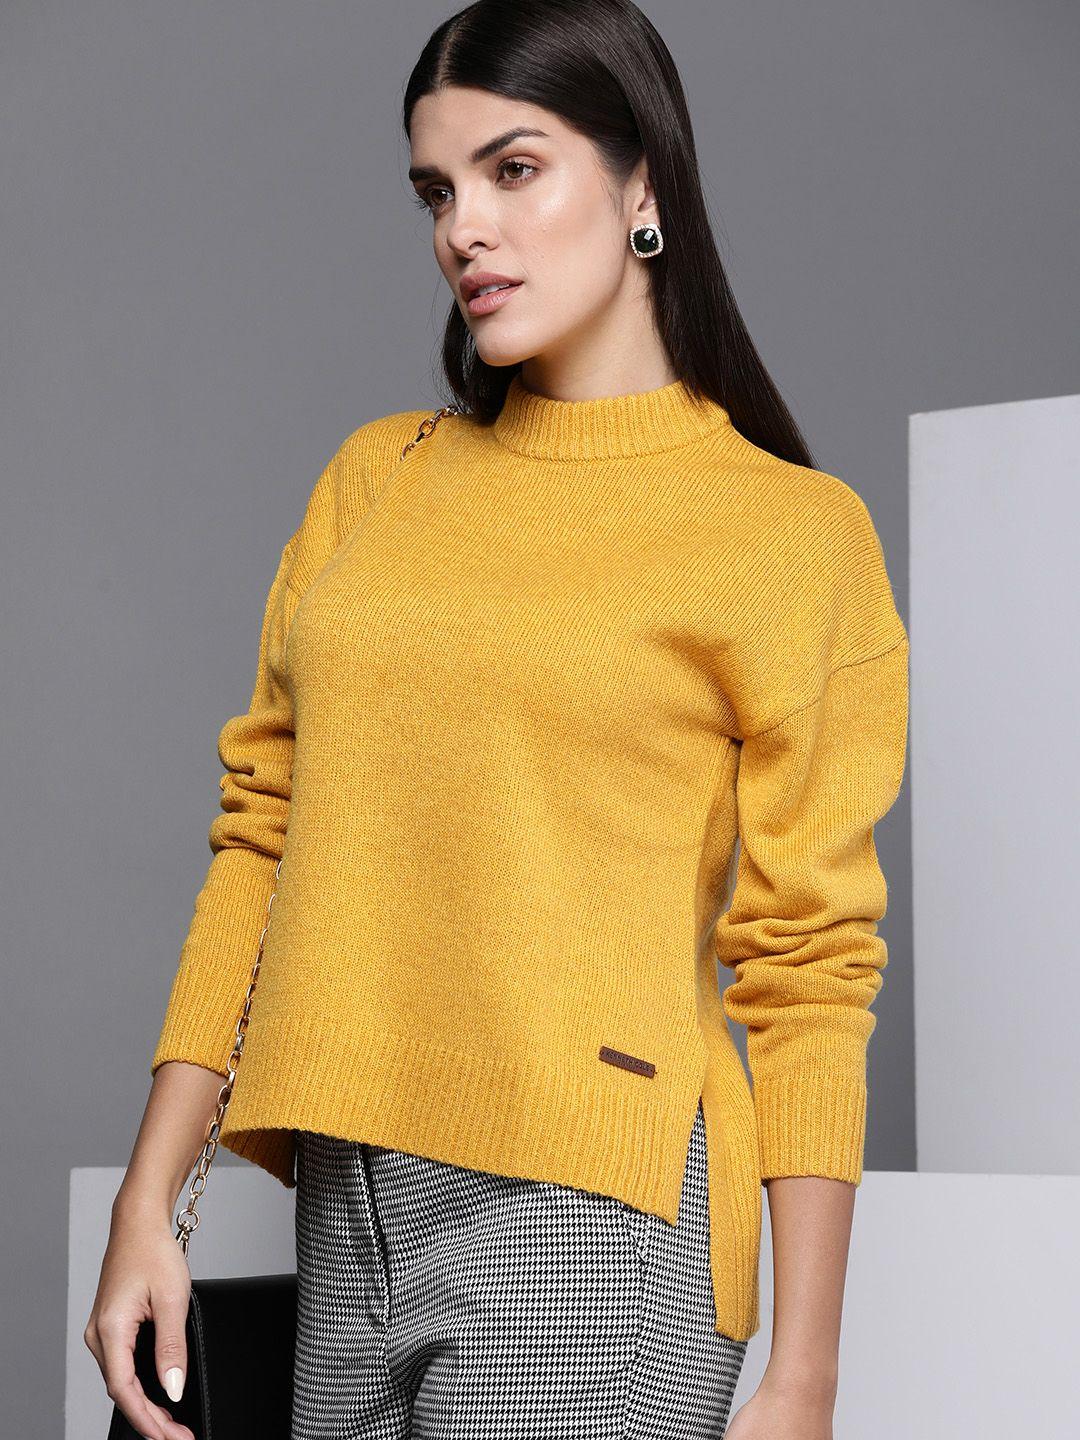 kenneth-cole-flair-women-mustard-self-design-open-knit-pullover-sweater